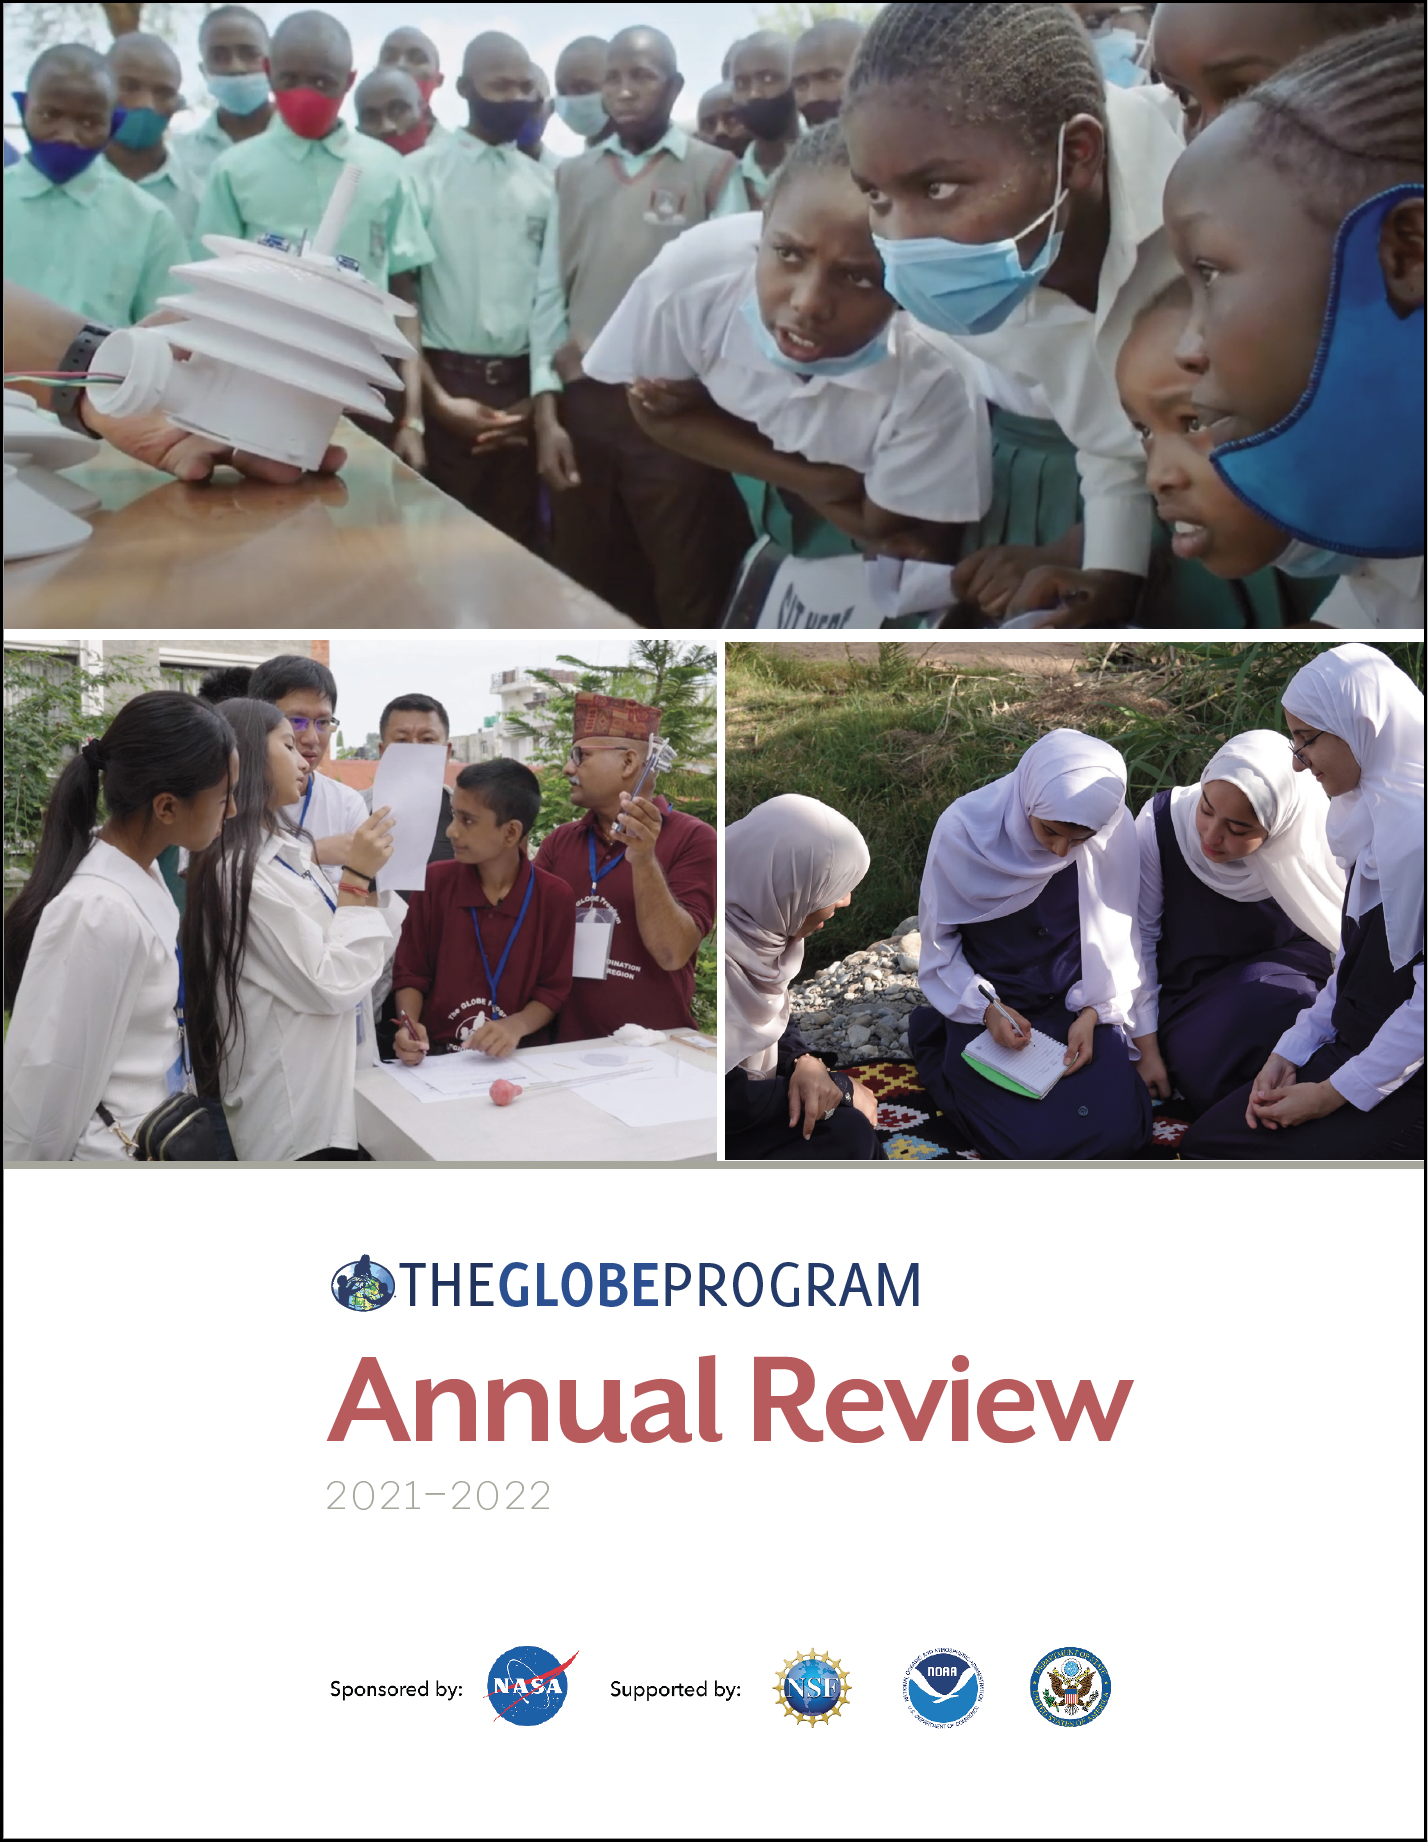 GLOBE Annual Review 2021-2022. Three images of children in different countries doing GLOBE data collection and activities